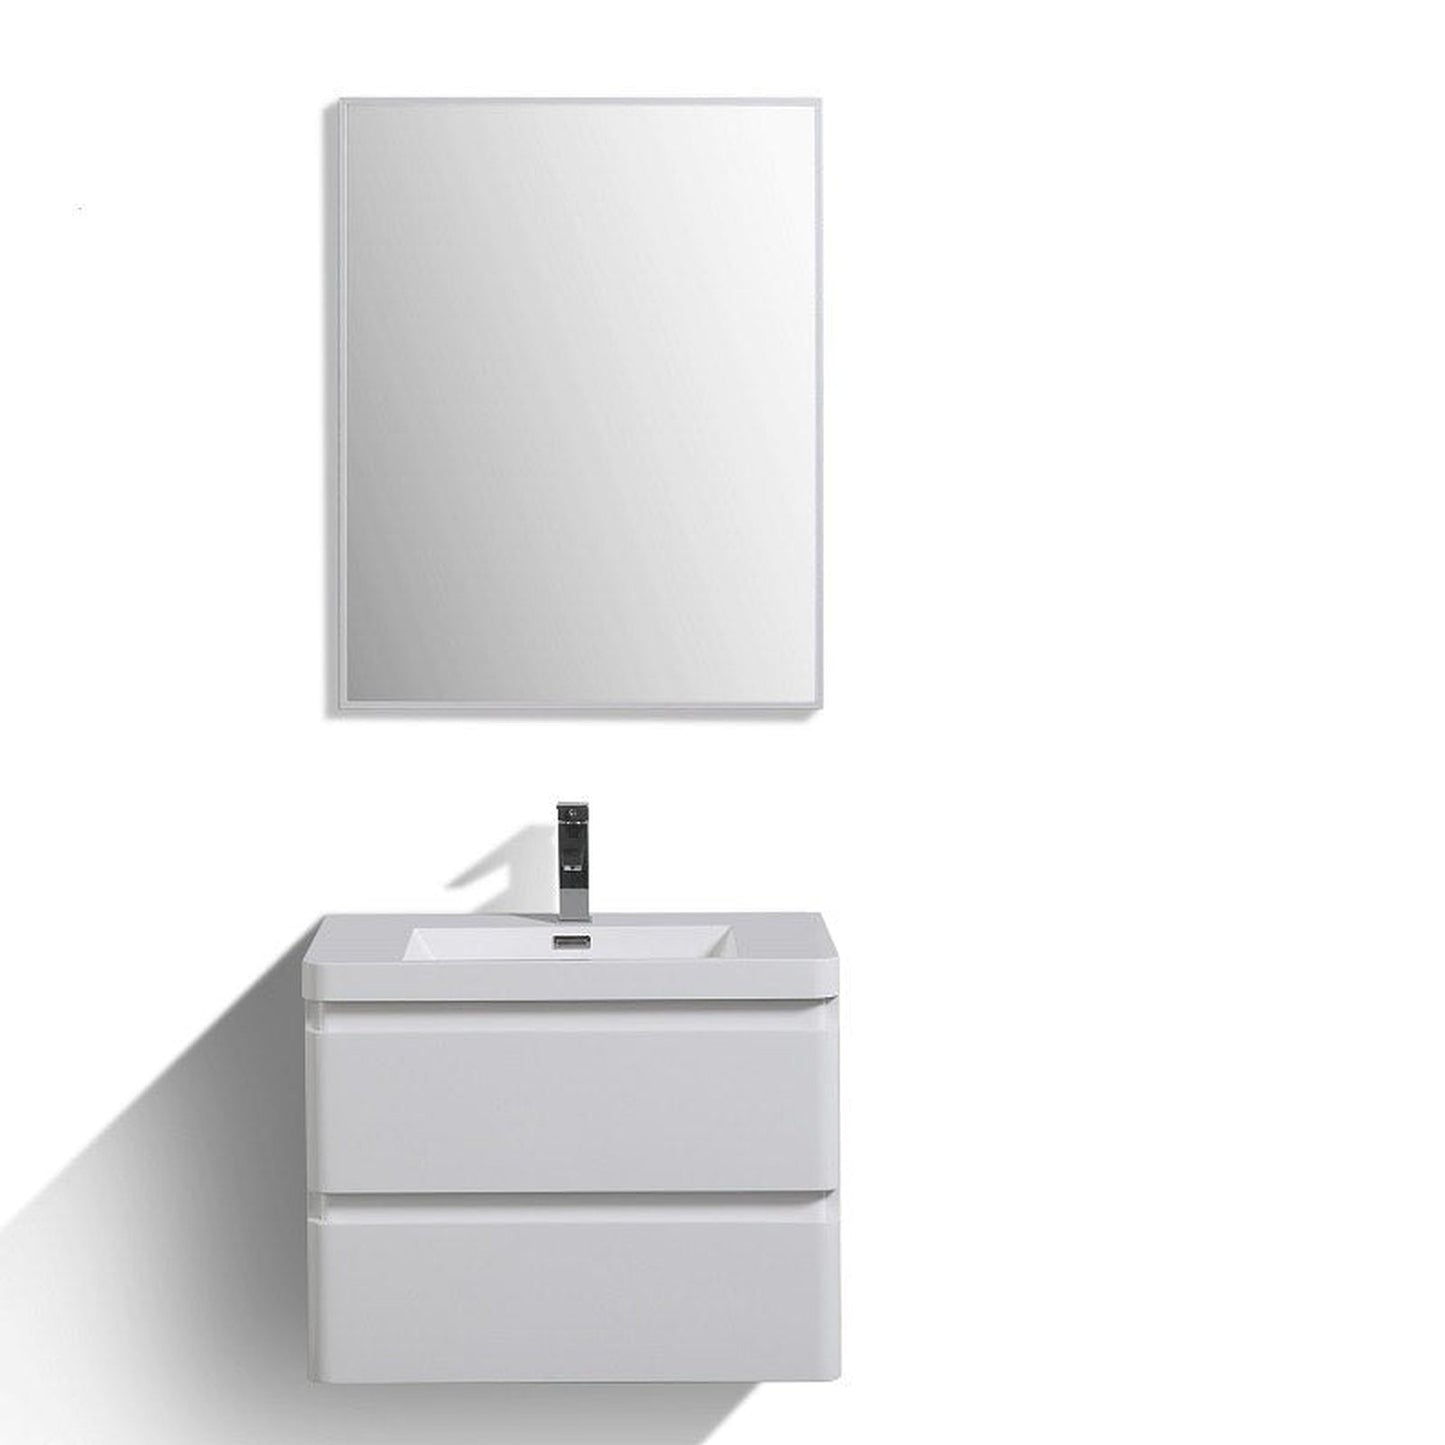 Eviva Smile 30" x 20" White Wall-Mounted Bathroom Vanity With White Single Integrated Sink